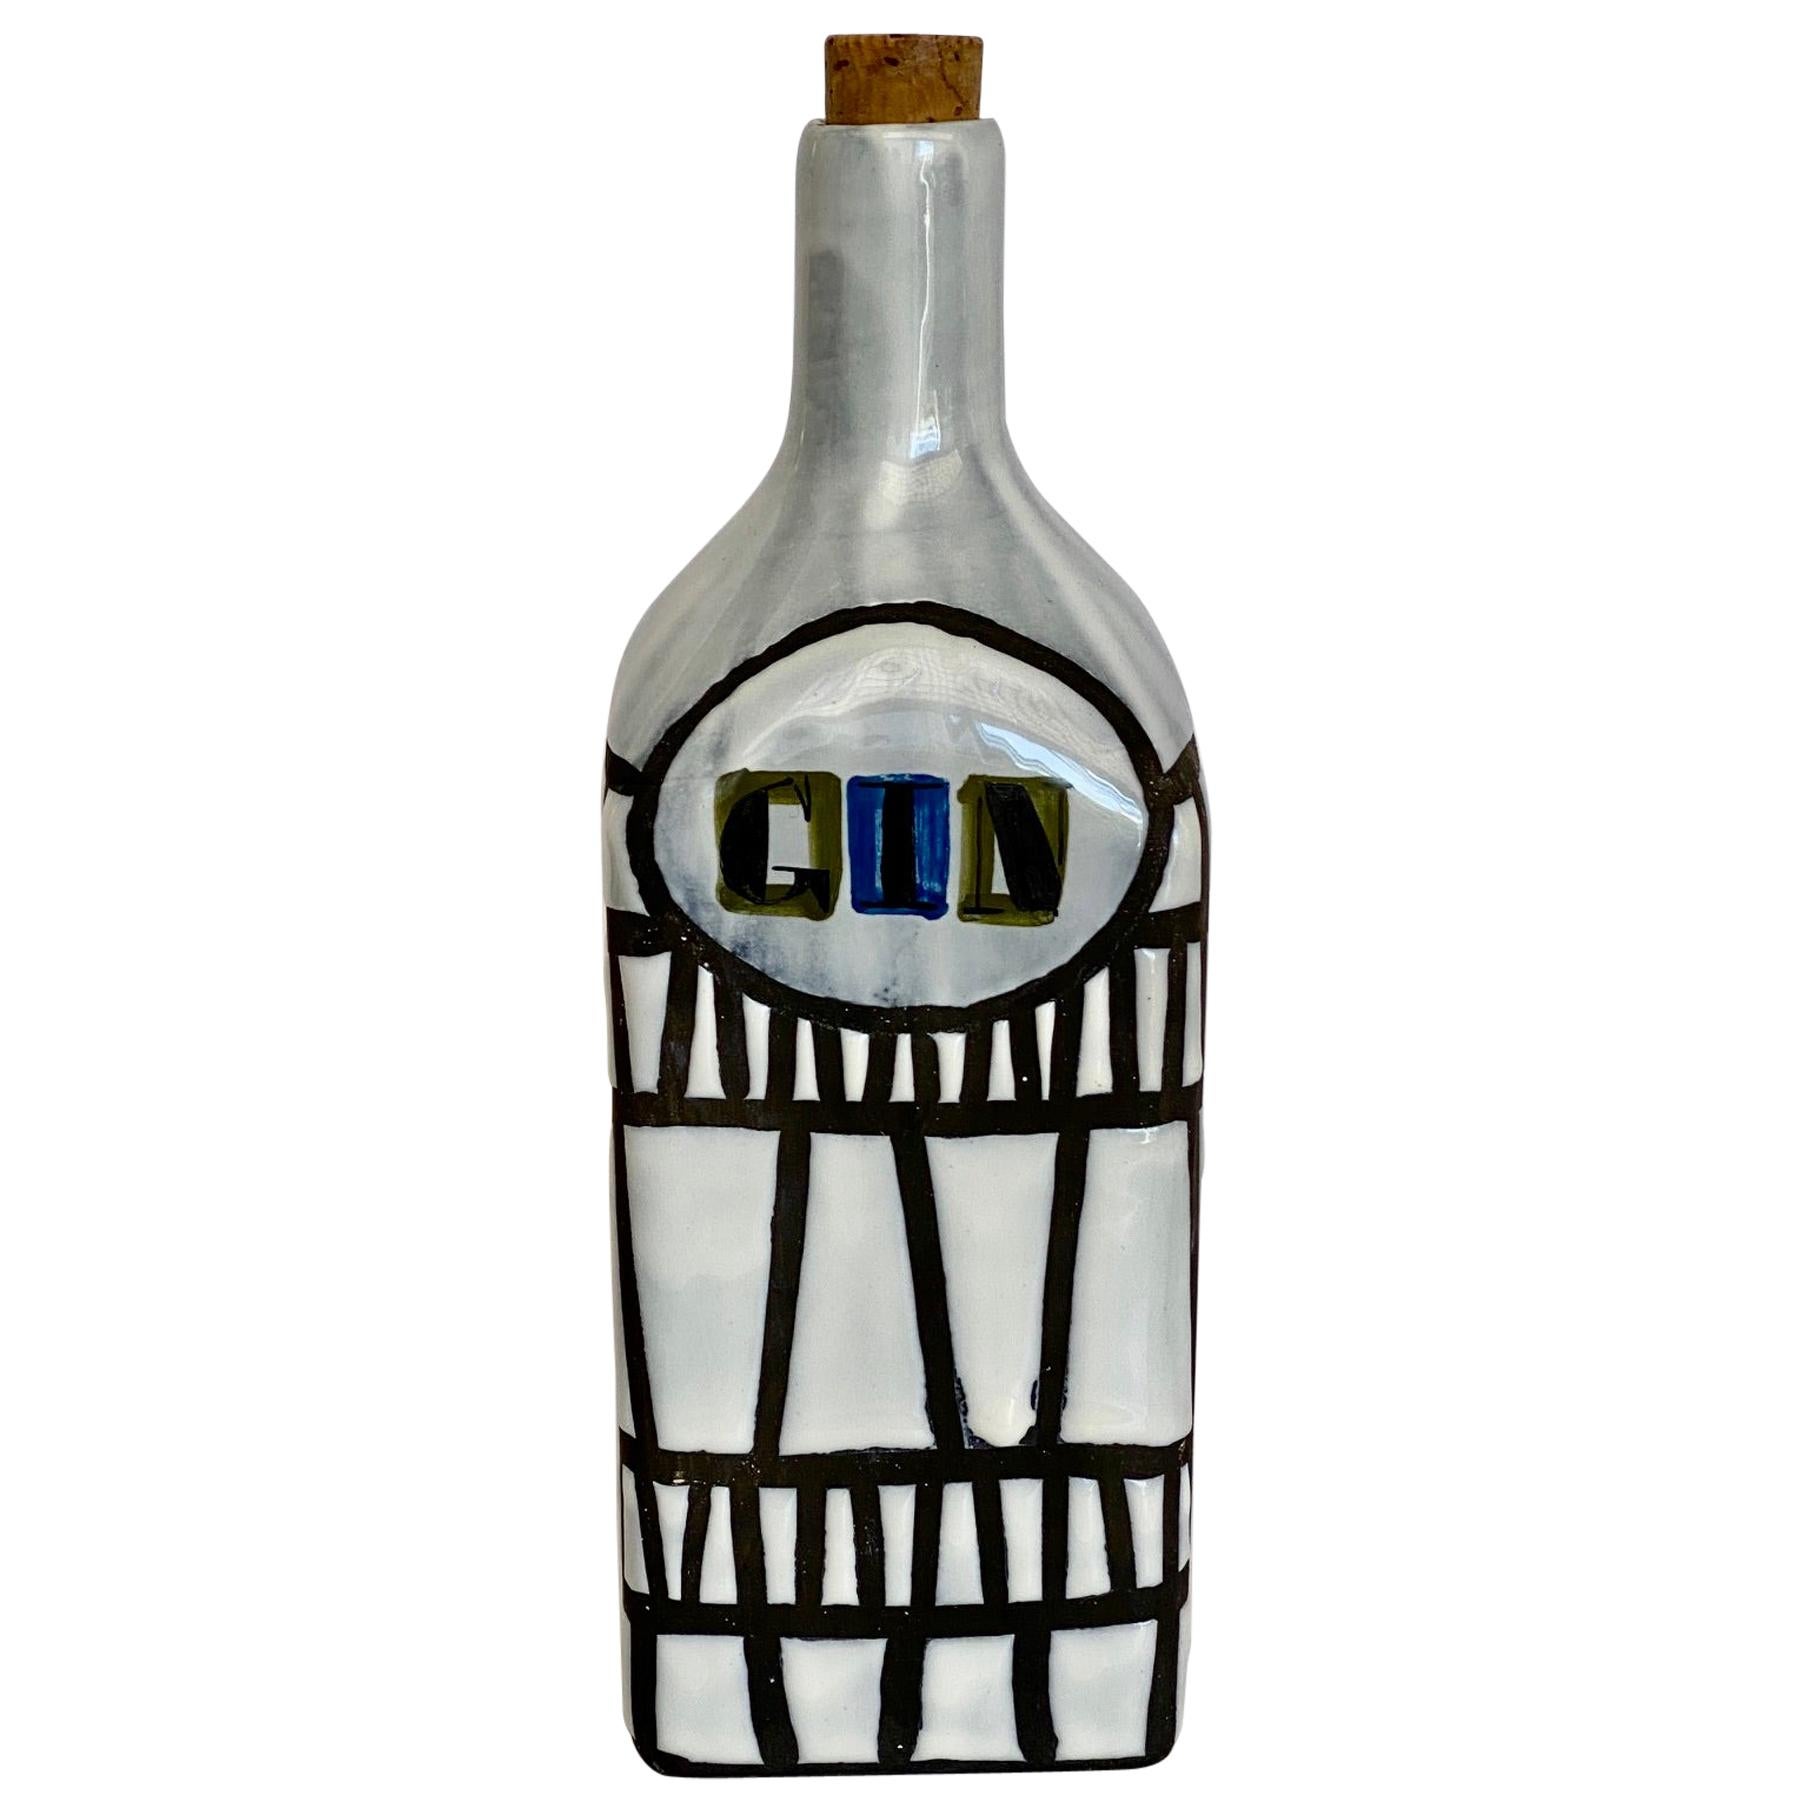 Roger Capron Ceramic "Gin" Bottle from Vallauris, 1950s For Sale